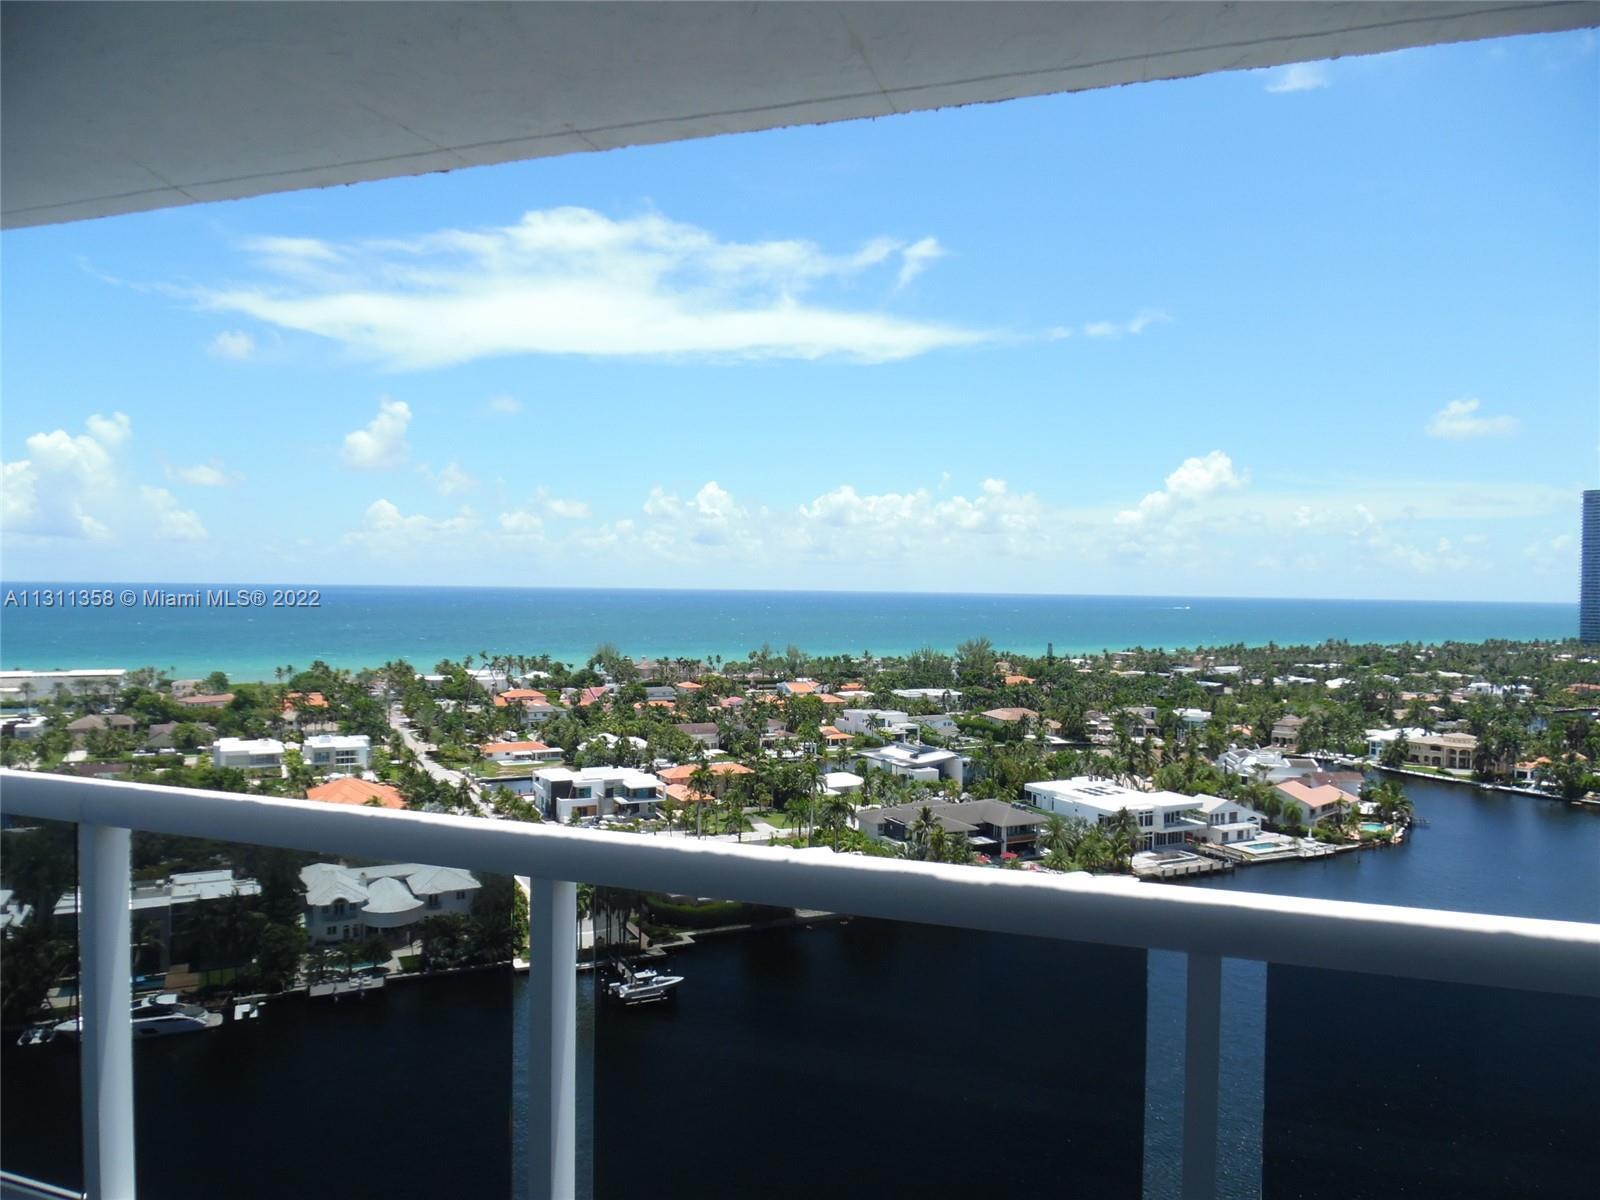 BEAUTIFUL UNIT IN VERY DESIRABLE WATERVIEW BUILDING. THE VIEWS ARE ABSOLUTELY MAGNIFICENT. THIS IS T